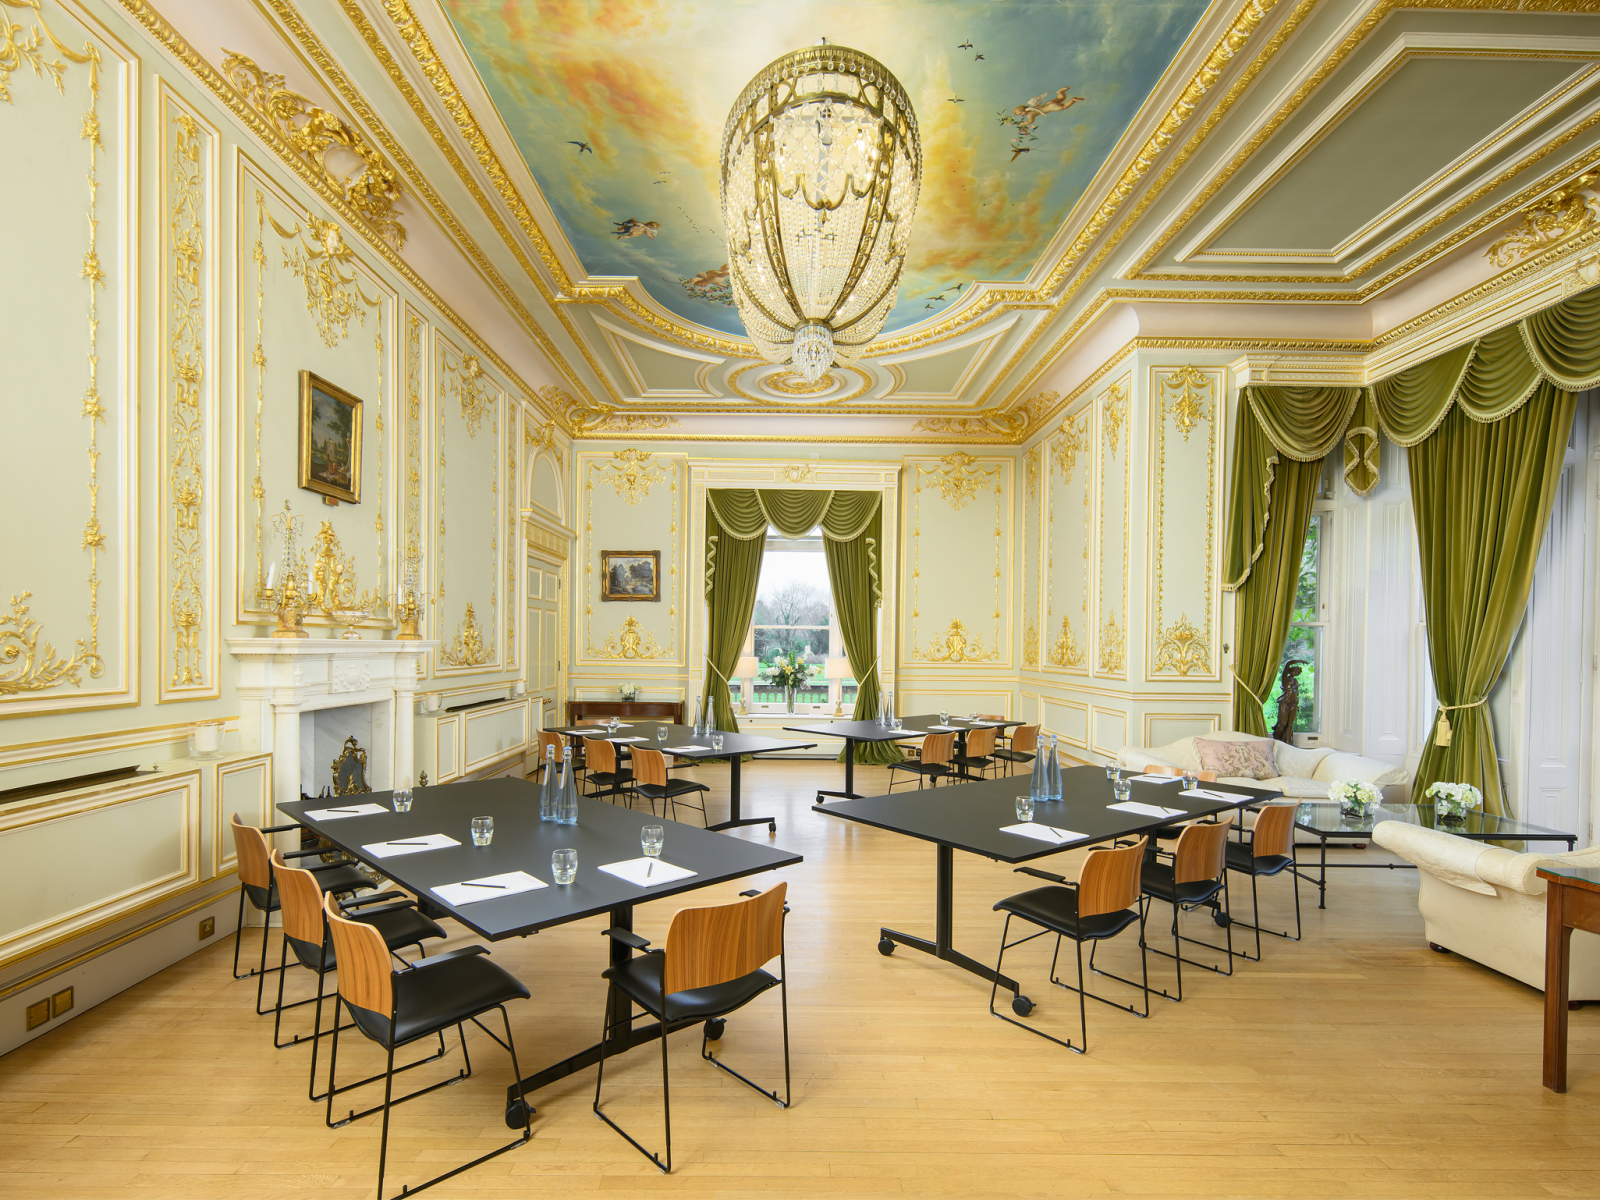 Meeting room set-up at Fetcham Park - ideal for working in groups